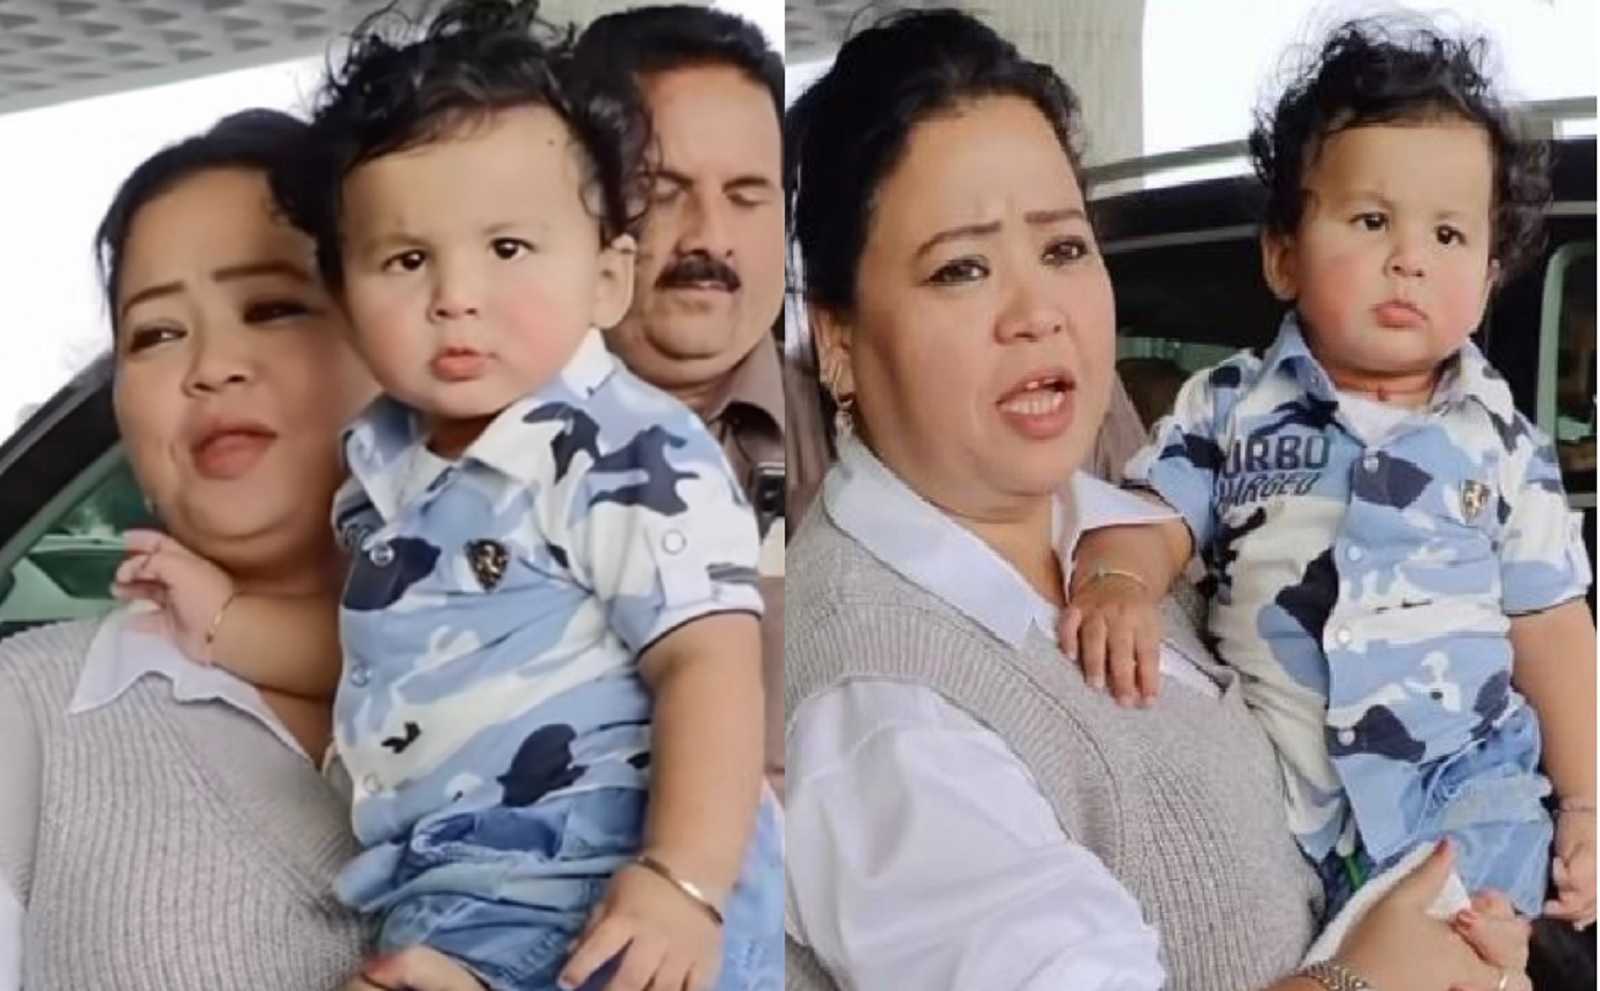 Bharti Singh refers to her son Gola as a 'traveller', paps can't wait for him to say 'mama'